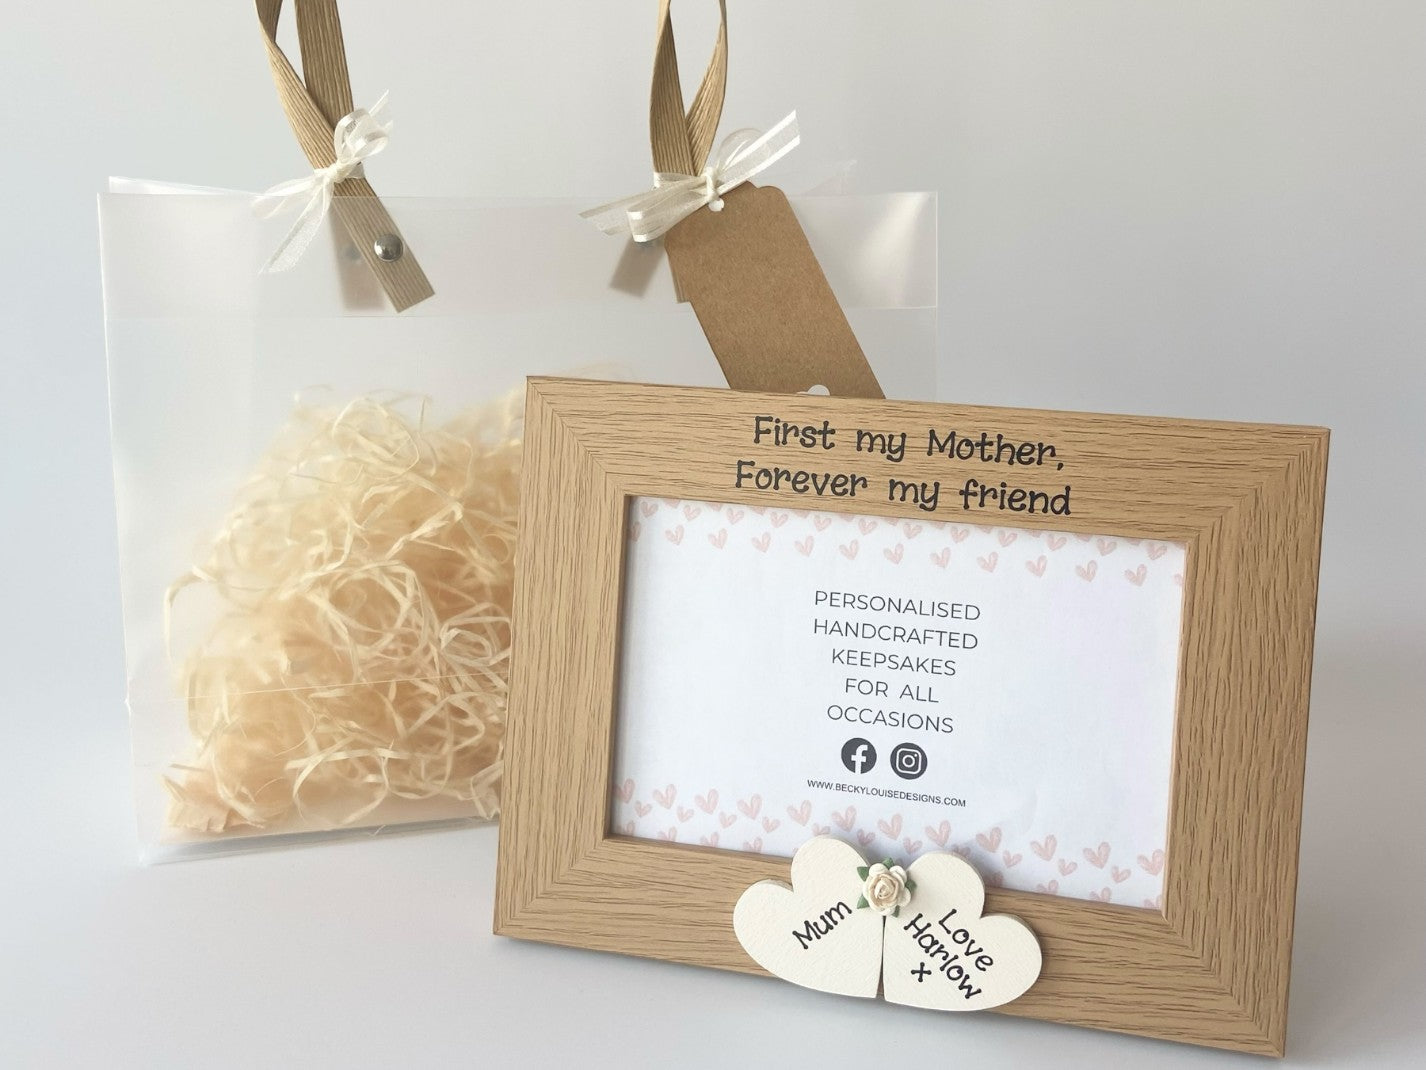 Image shows gift bag included with frame